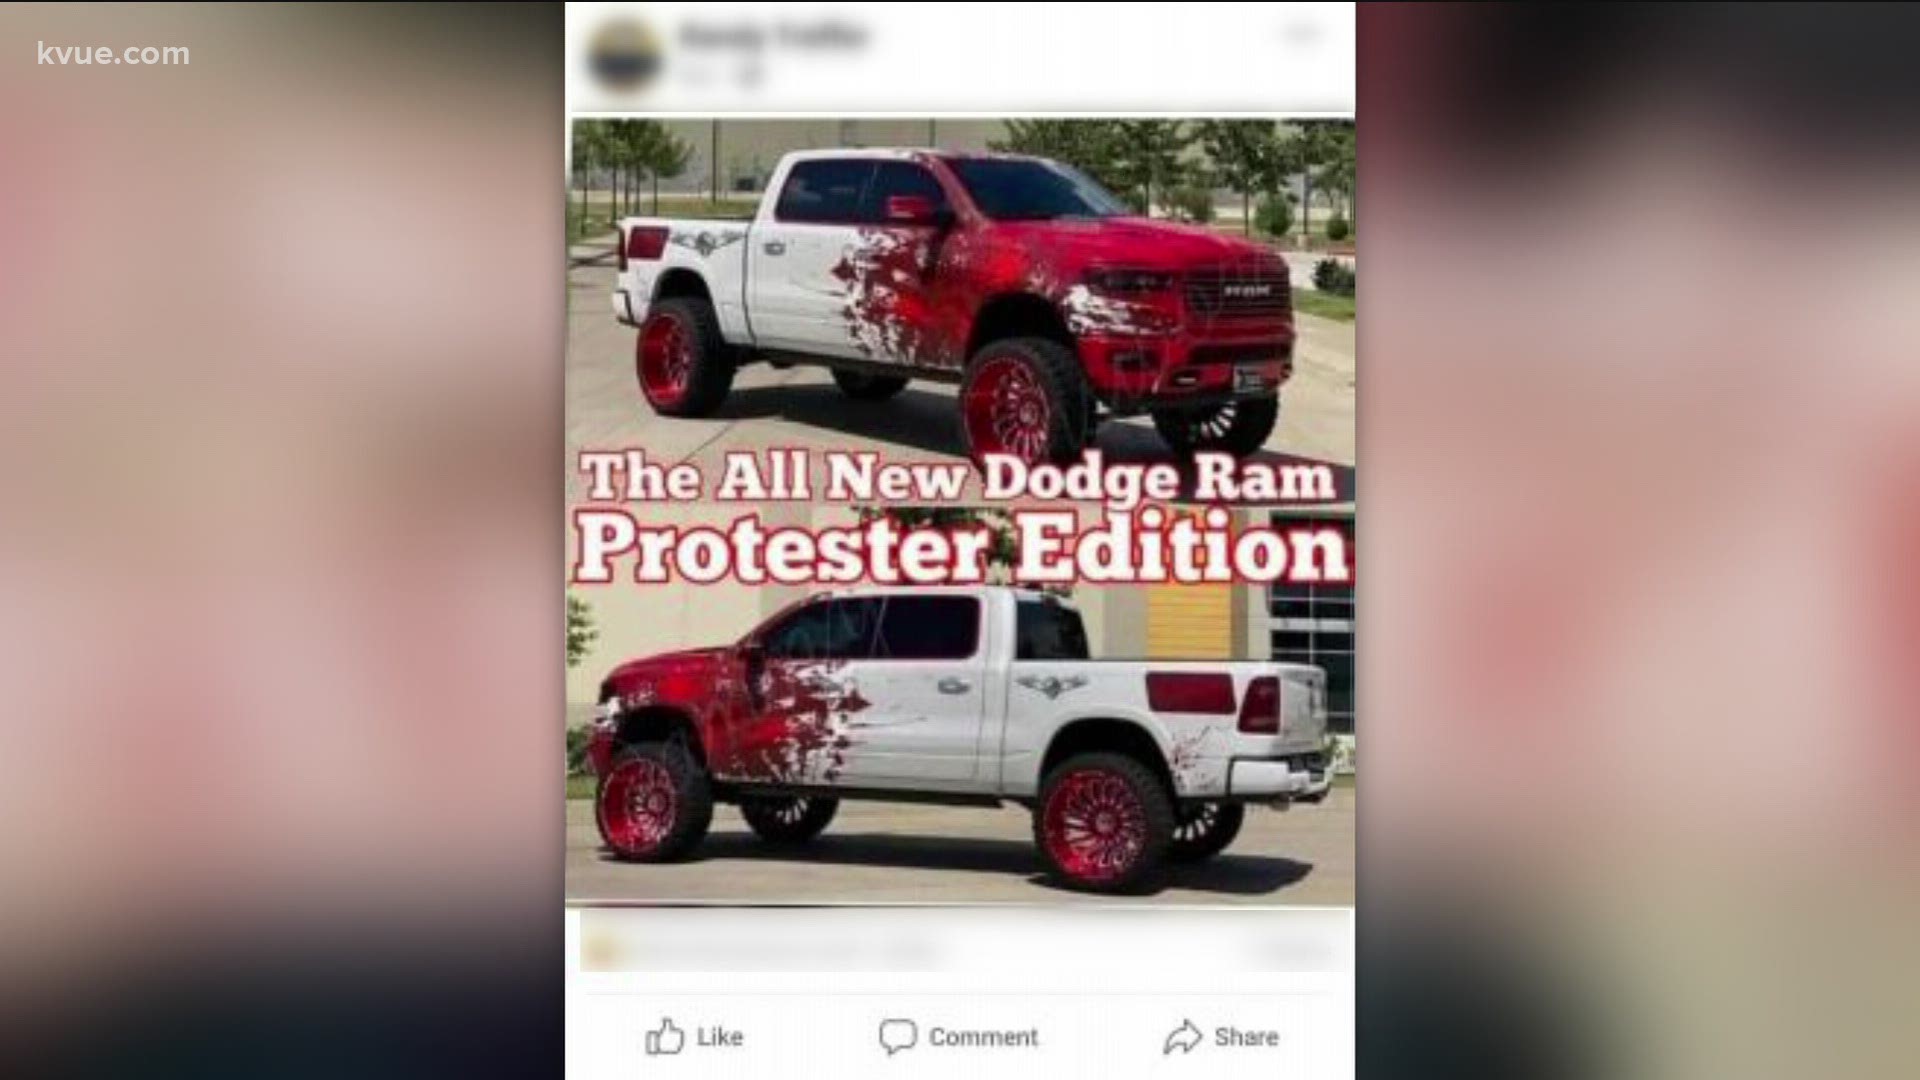 Screenshots of the post were shared to KVUE by viewers, which show a truck with red paint on the front and text that reads "The All New Dodge Ram Protester Edition."